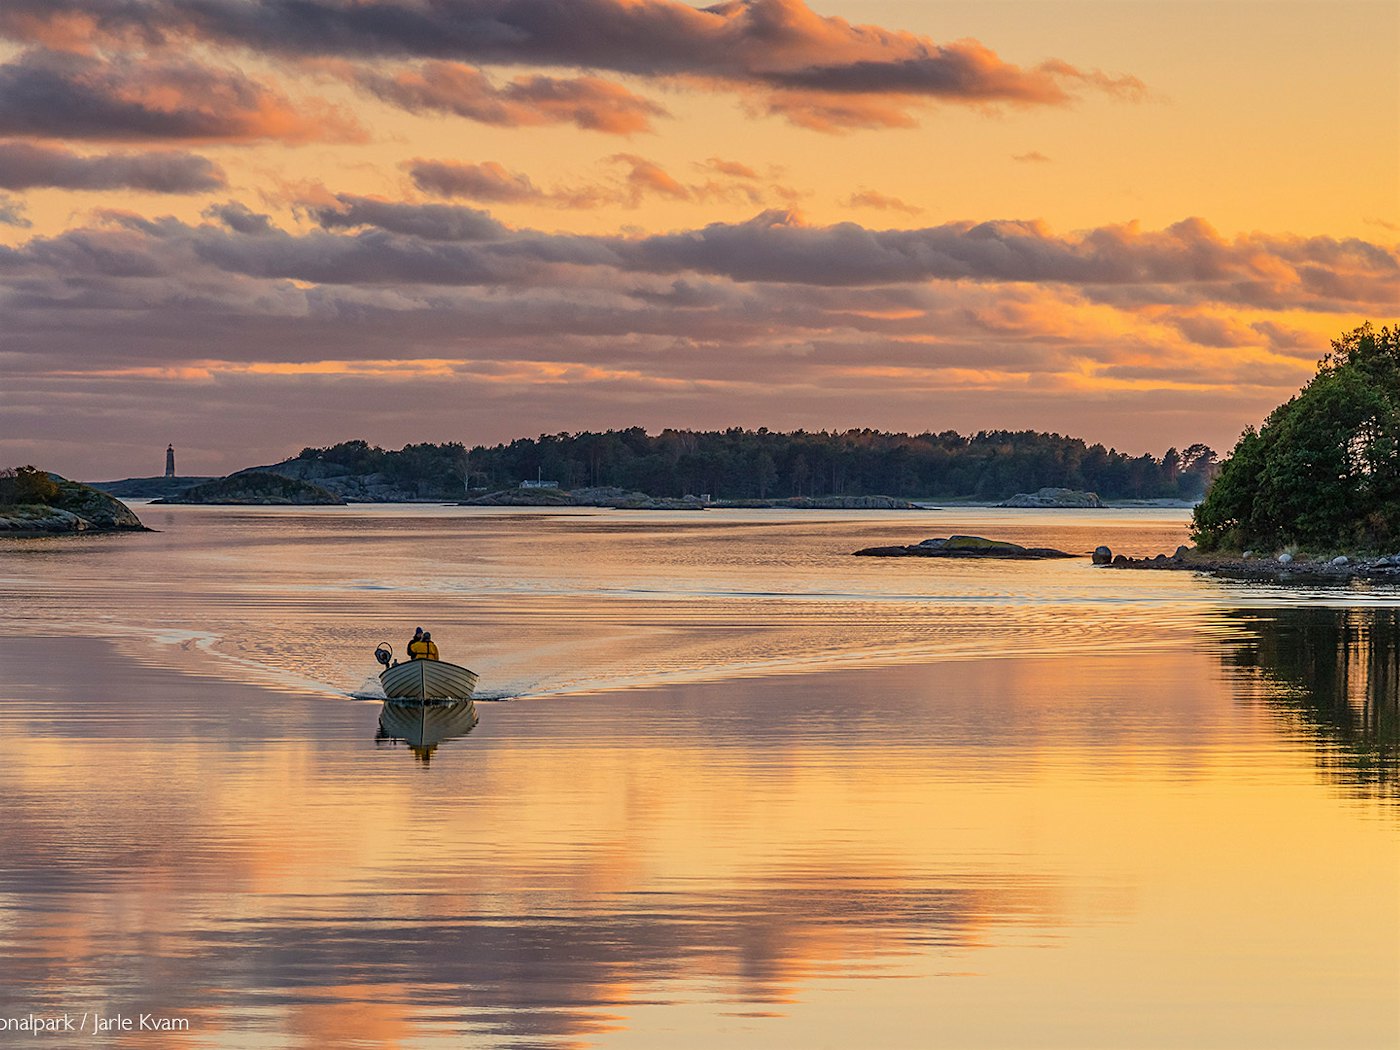 The boat sails across the still water with a dramatic sunset reflected in the water. Photo